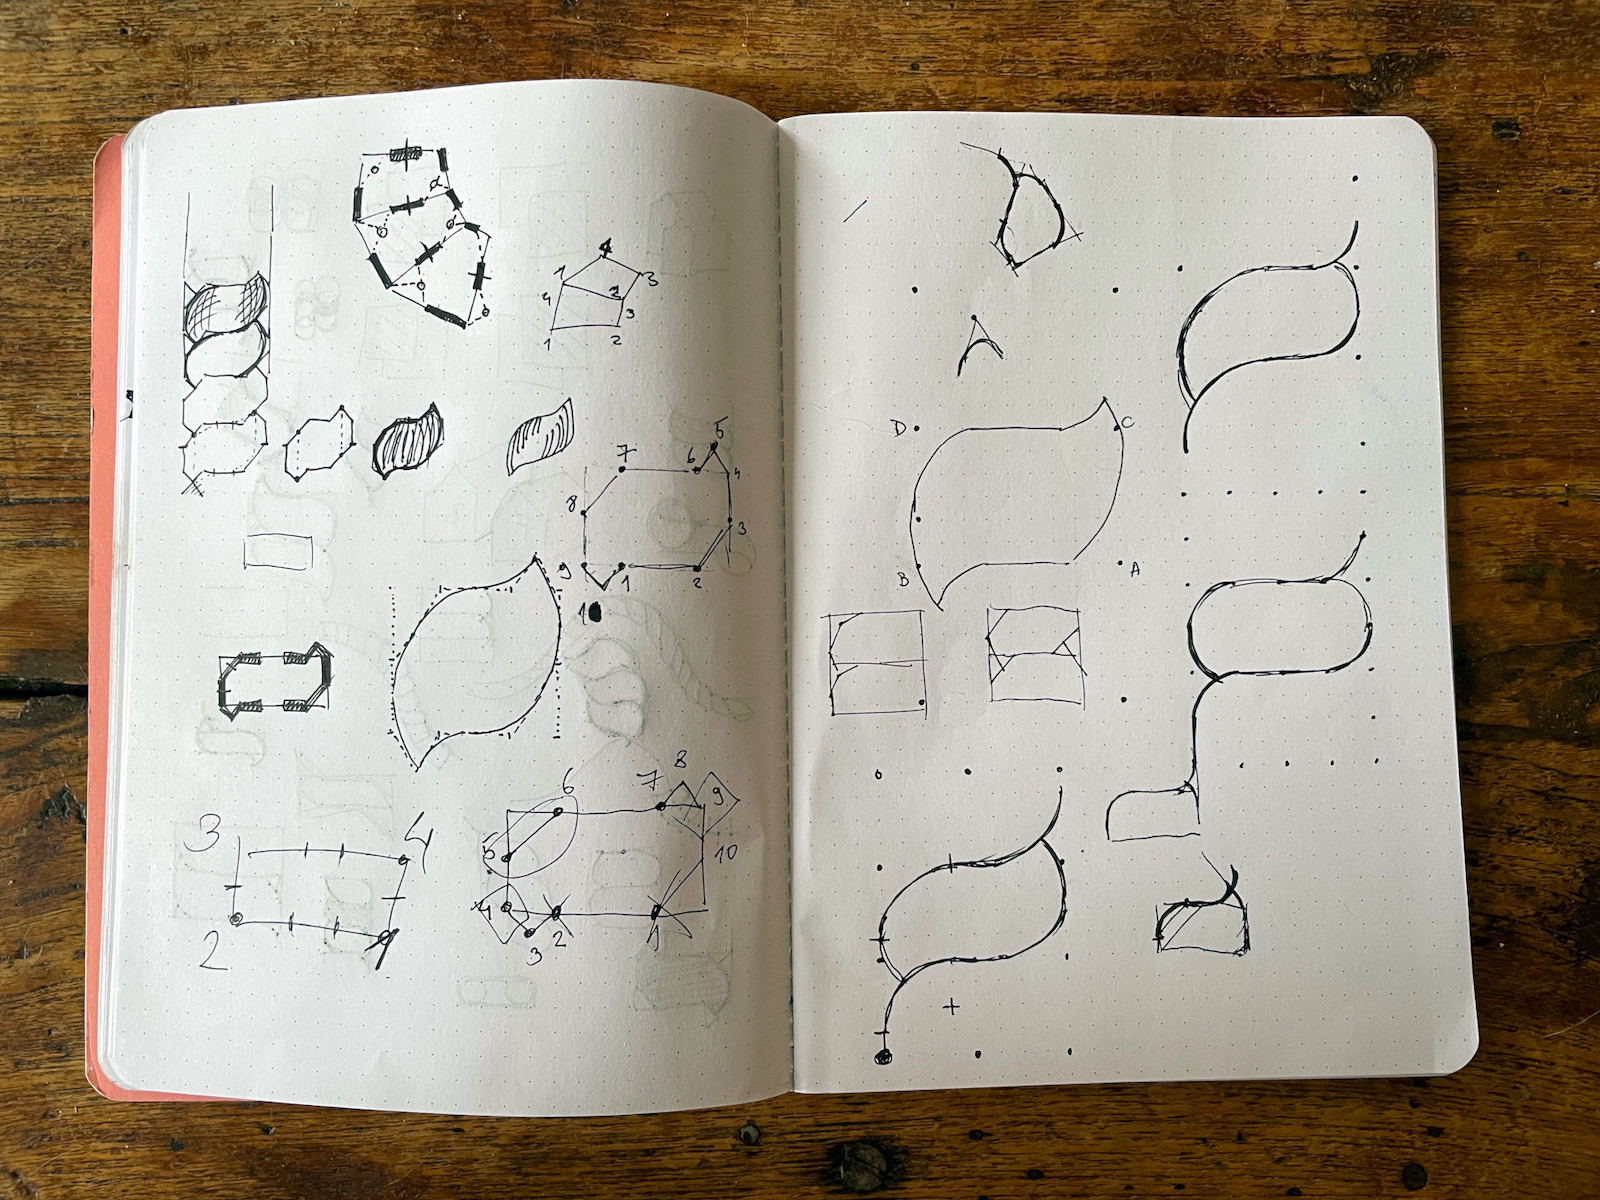 My notebook with sketches I draw while solving the problem